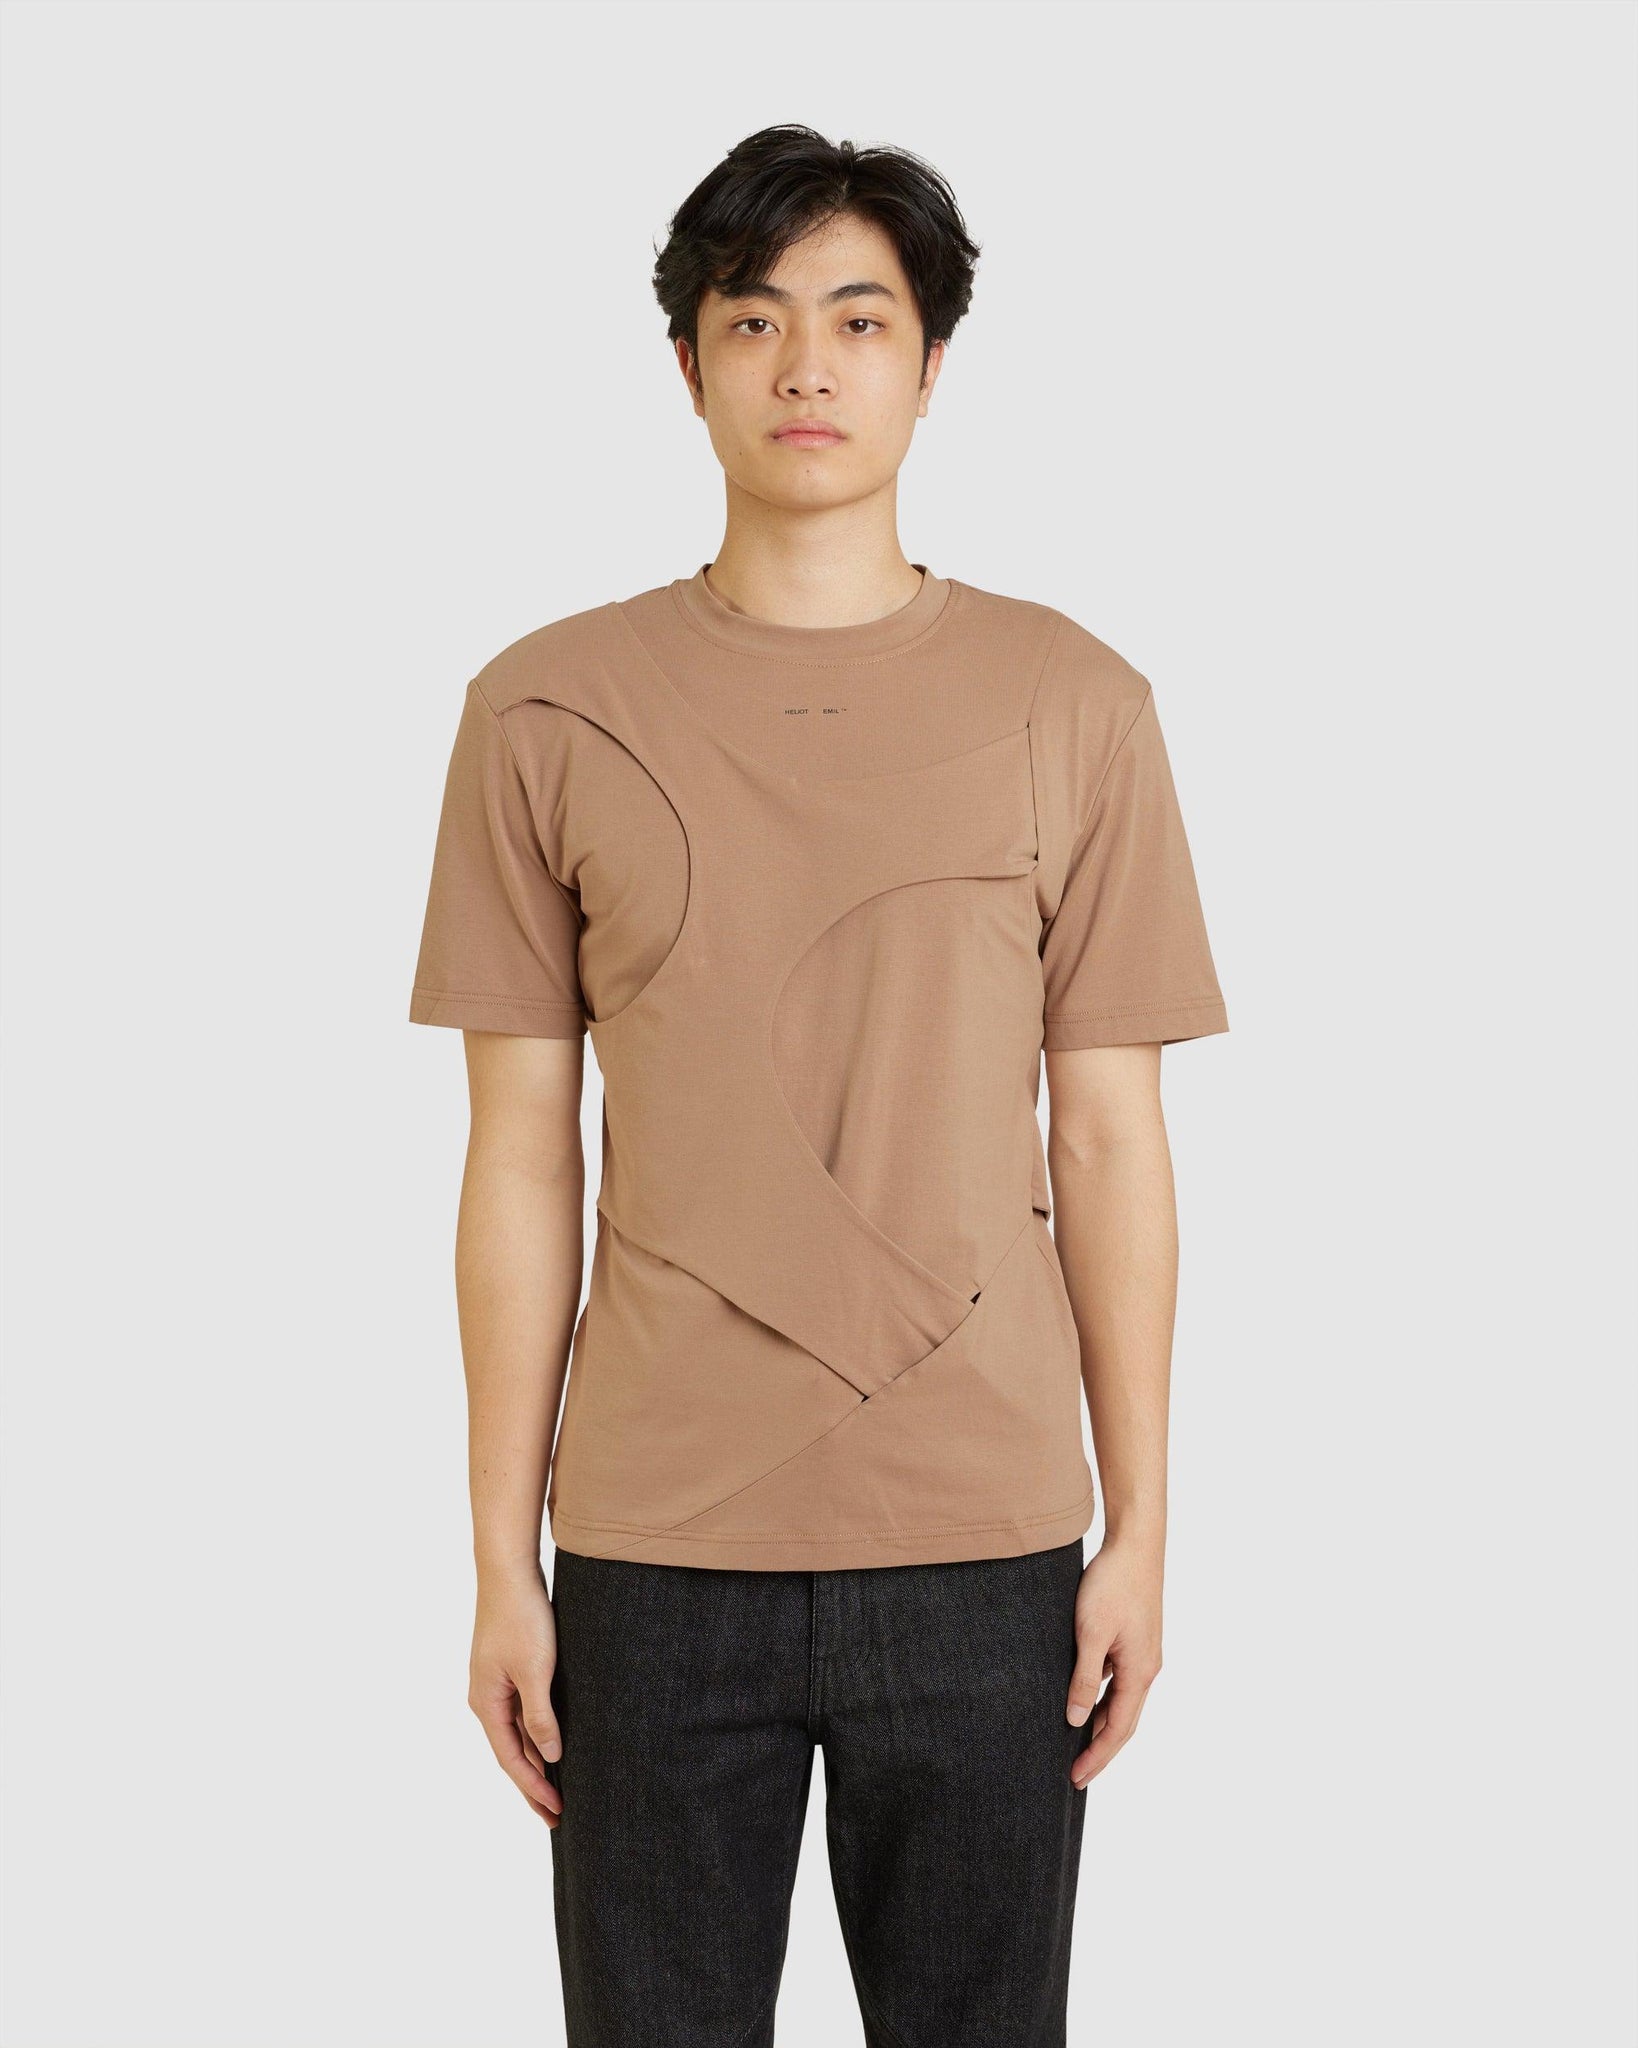 Nepheline T-Shirt - {{ collection.title }} - Chinatown Country Club 